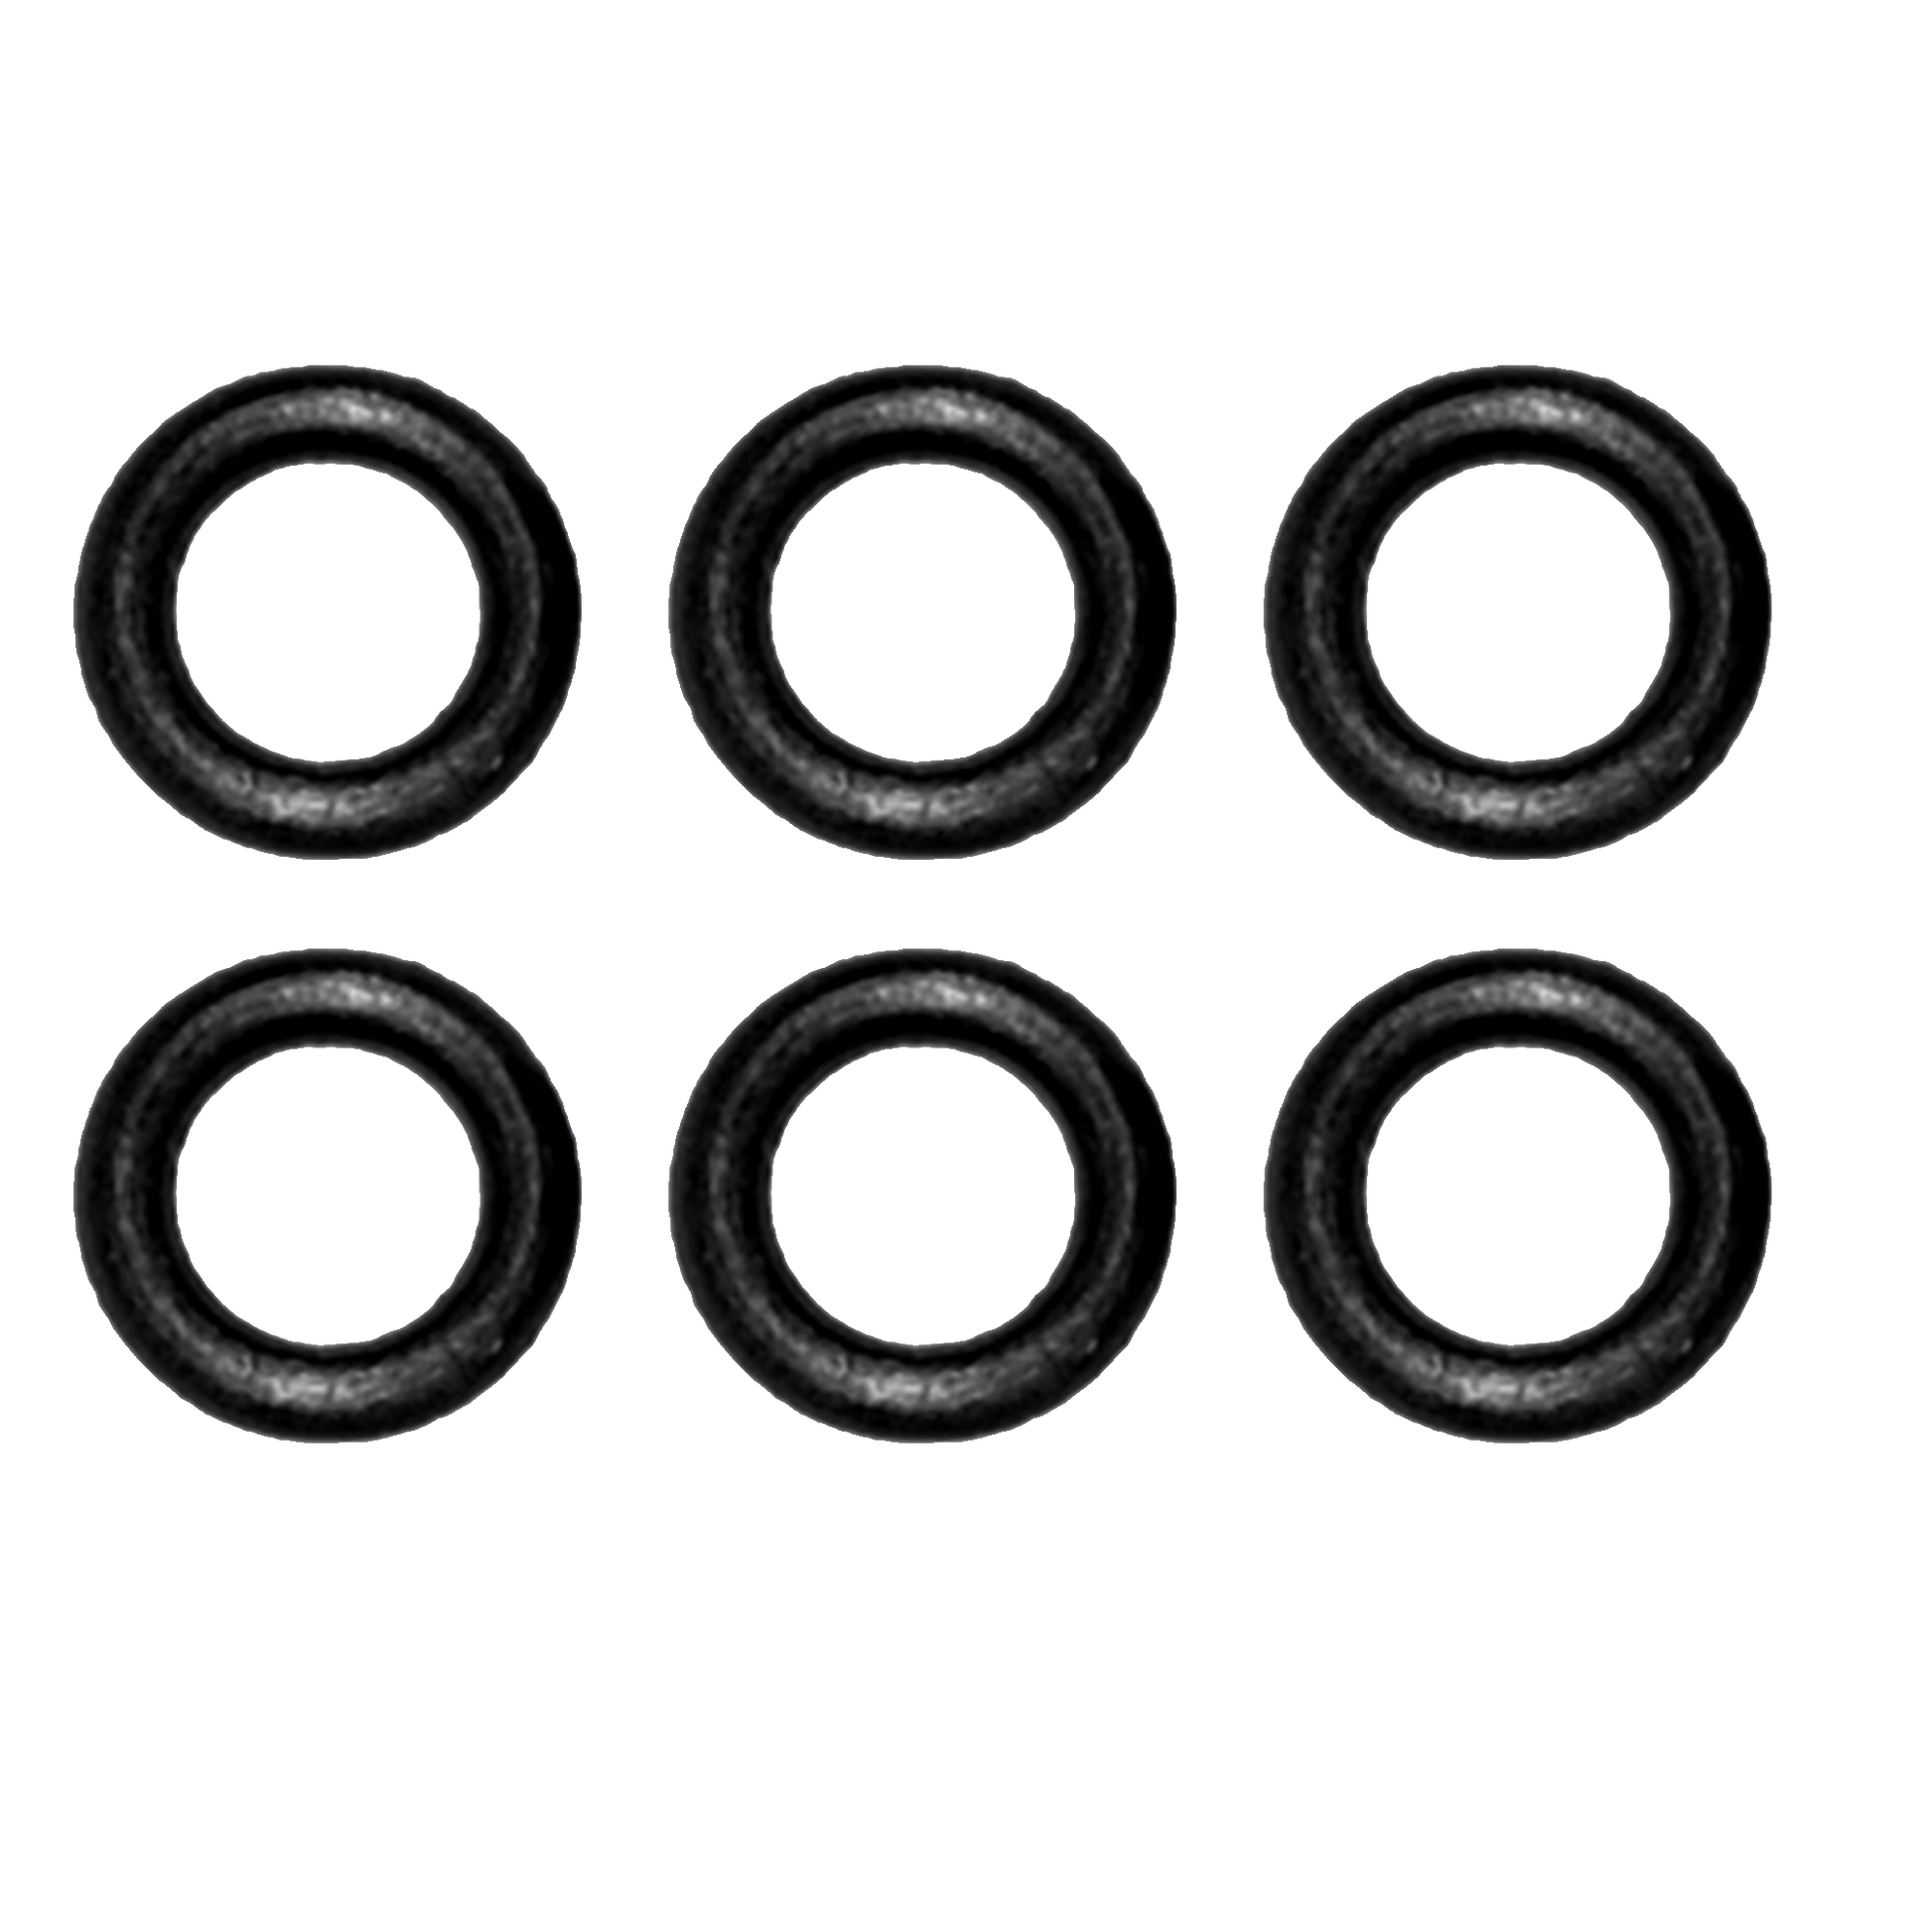 Six-pack of black 2ba O-Rings designed to secure dart components, providing a tight fit and consistent performance.